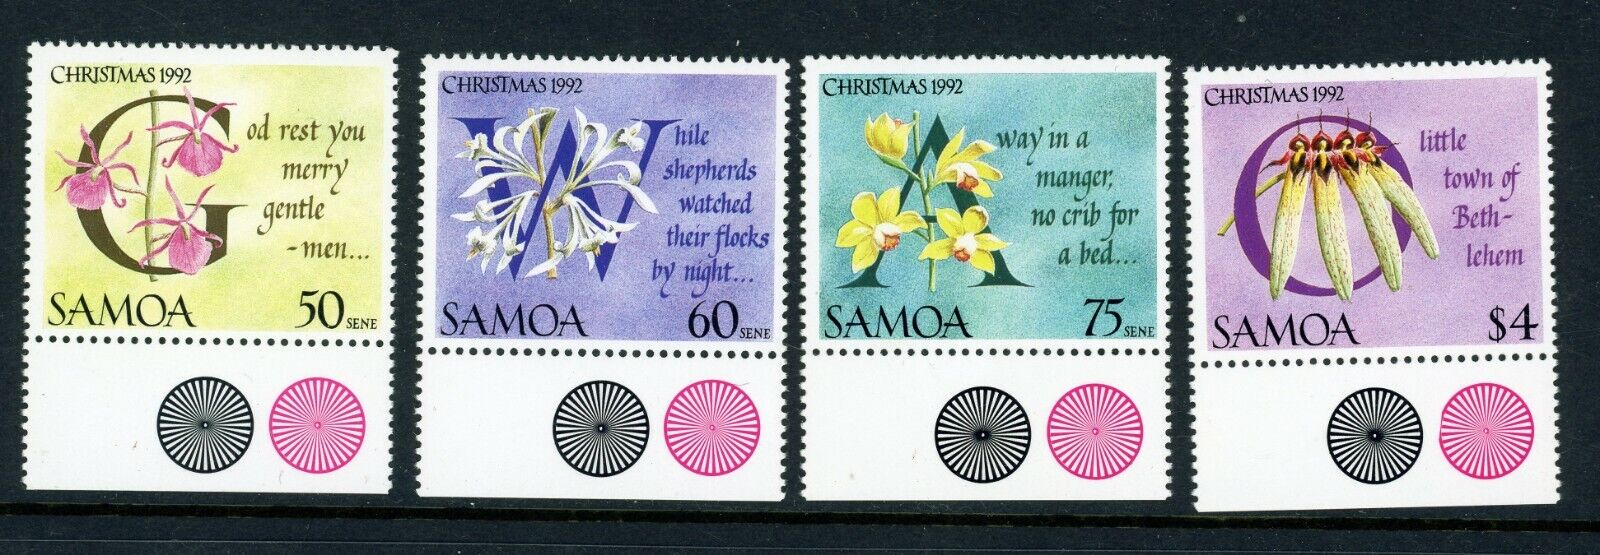 Samoa 1992 Orchids And Christmas Cards Stamp Set